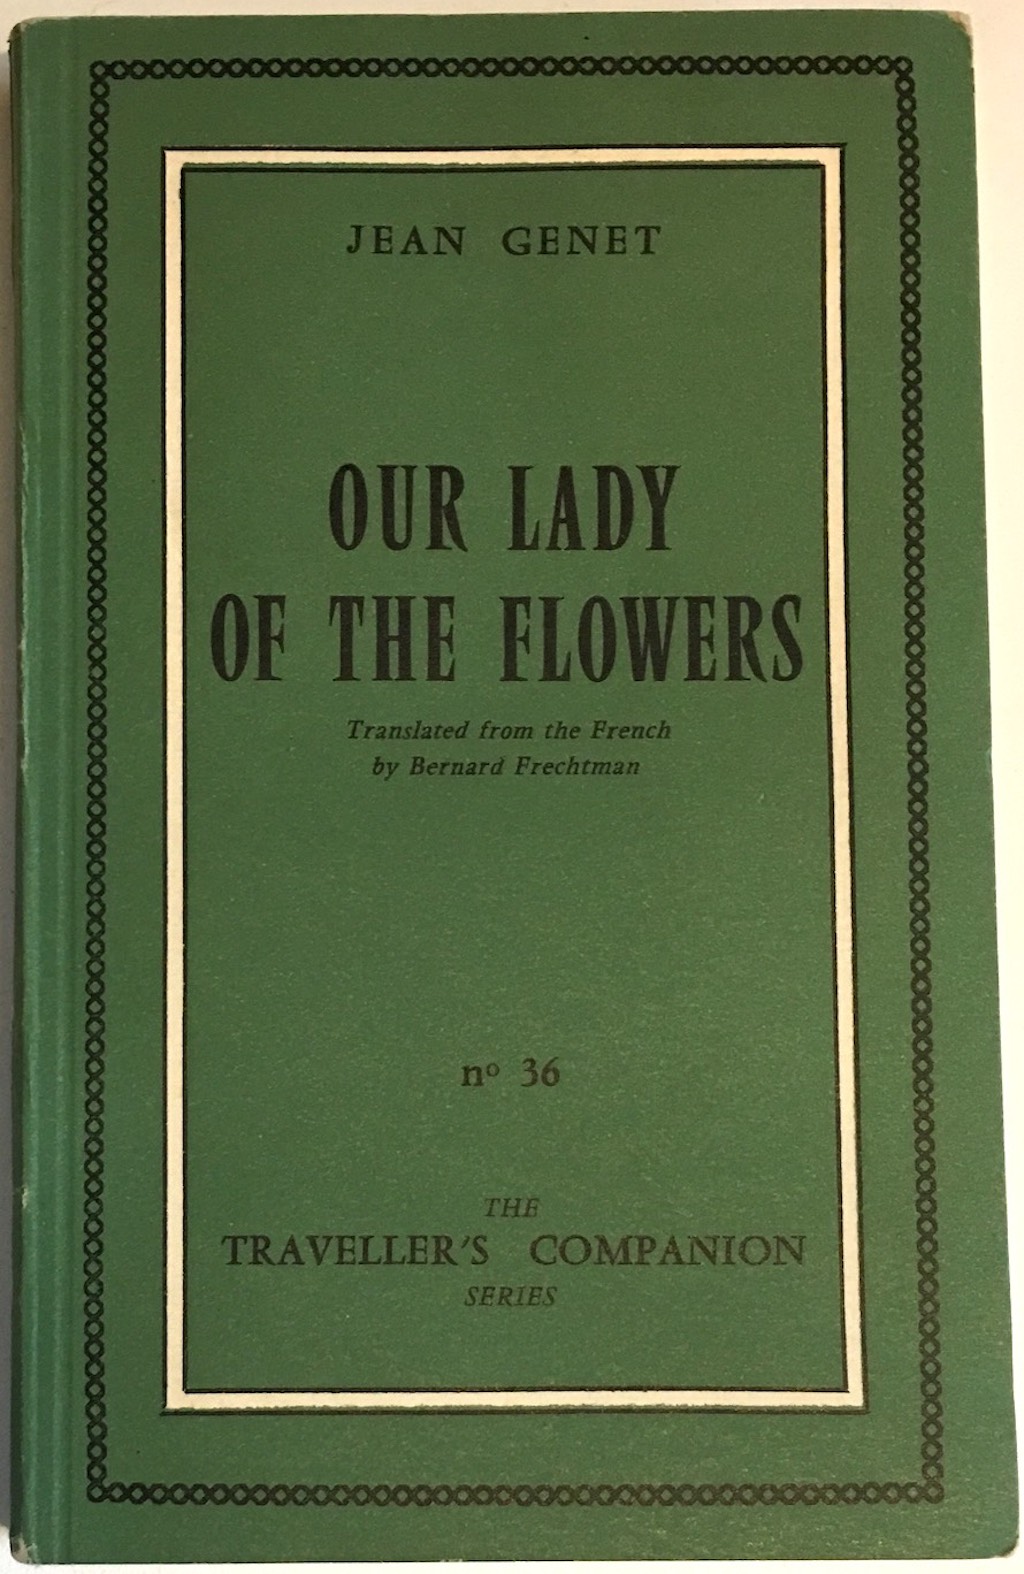 A copy of Jean Genet's Our Lady of the Flowers, published in the Olympia Press Traveller's Companion series